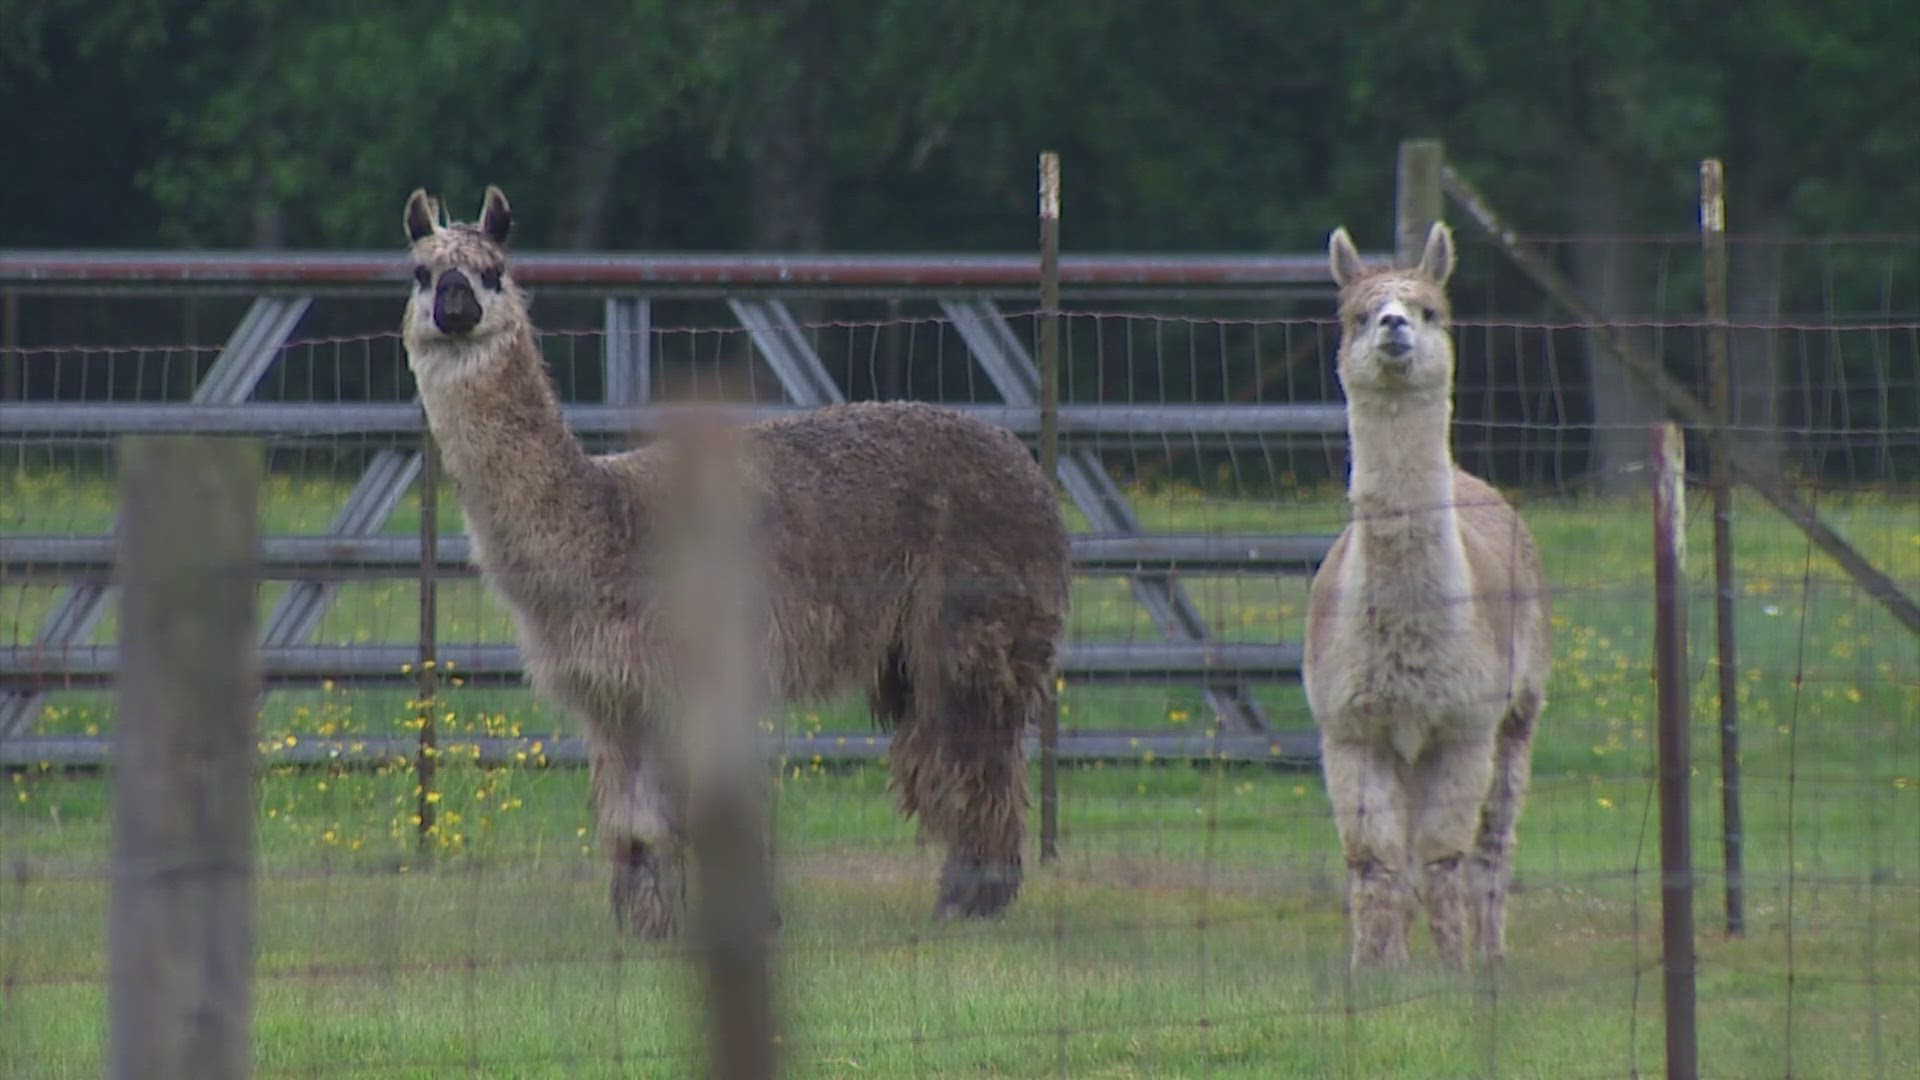 Ten of Connie Beauvais' 15 alpacas were shot and killed in the middle of the night, some of the shots close to her home.